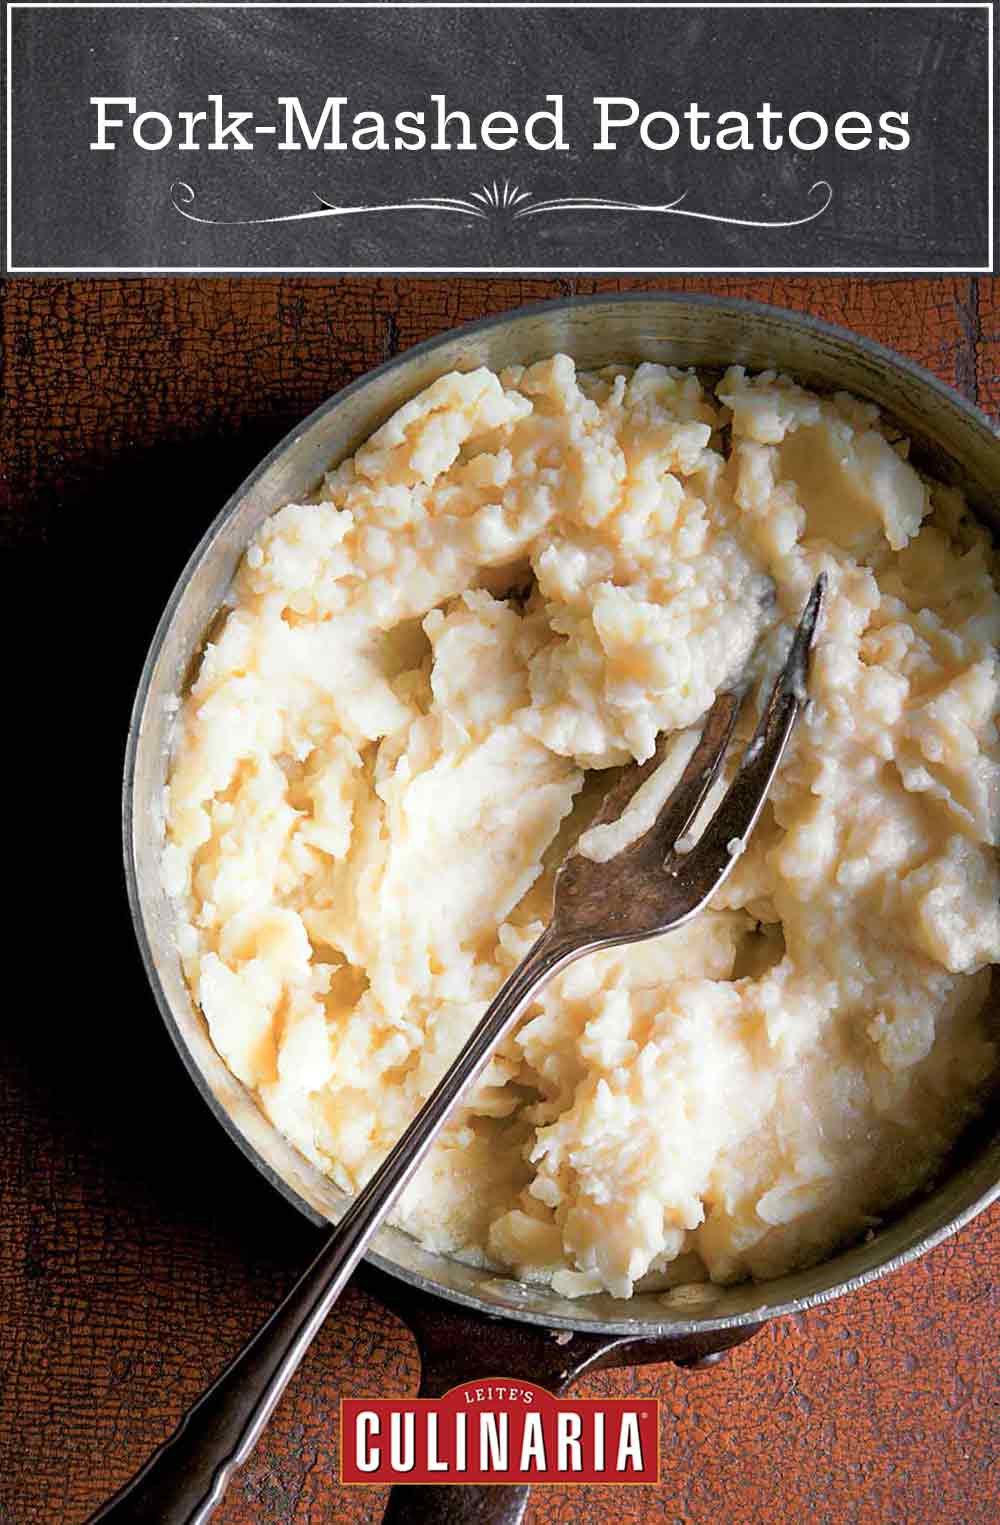 A pot of fork-mashed potatoes with a fork resting inside.